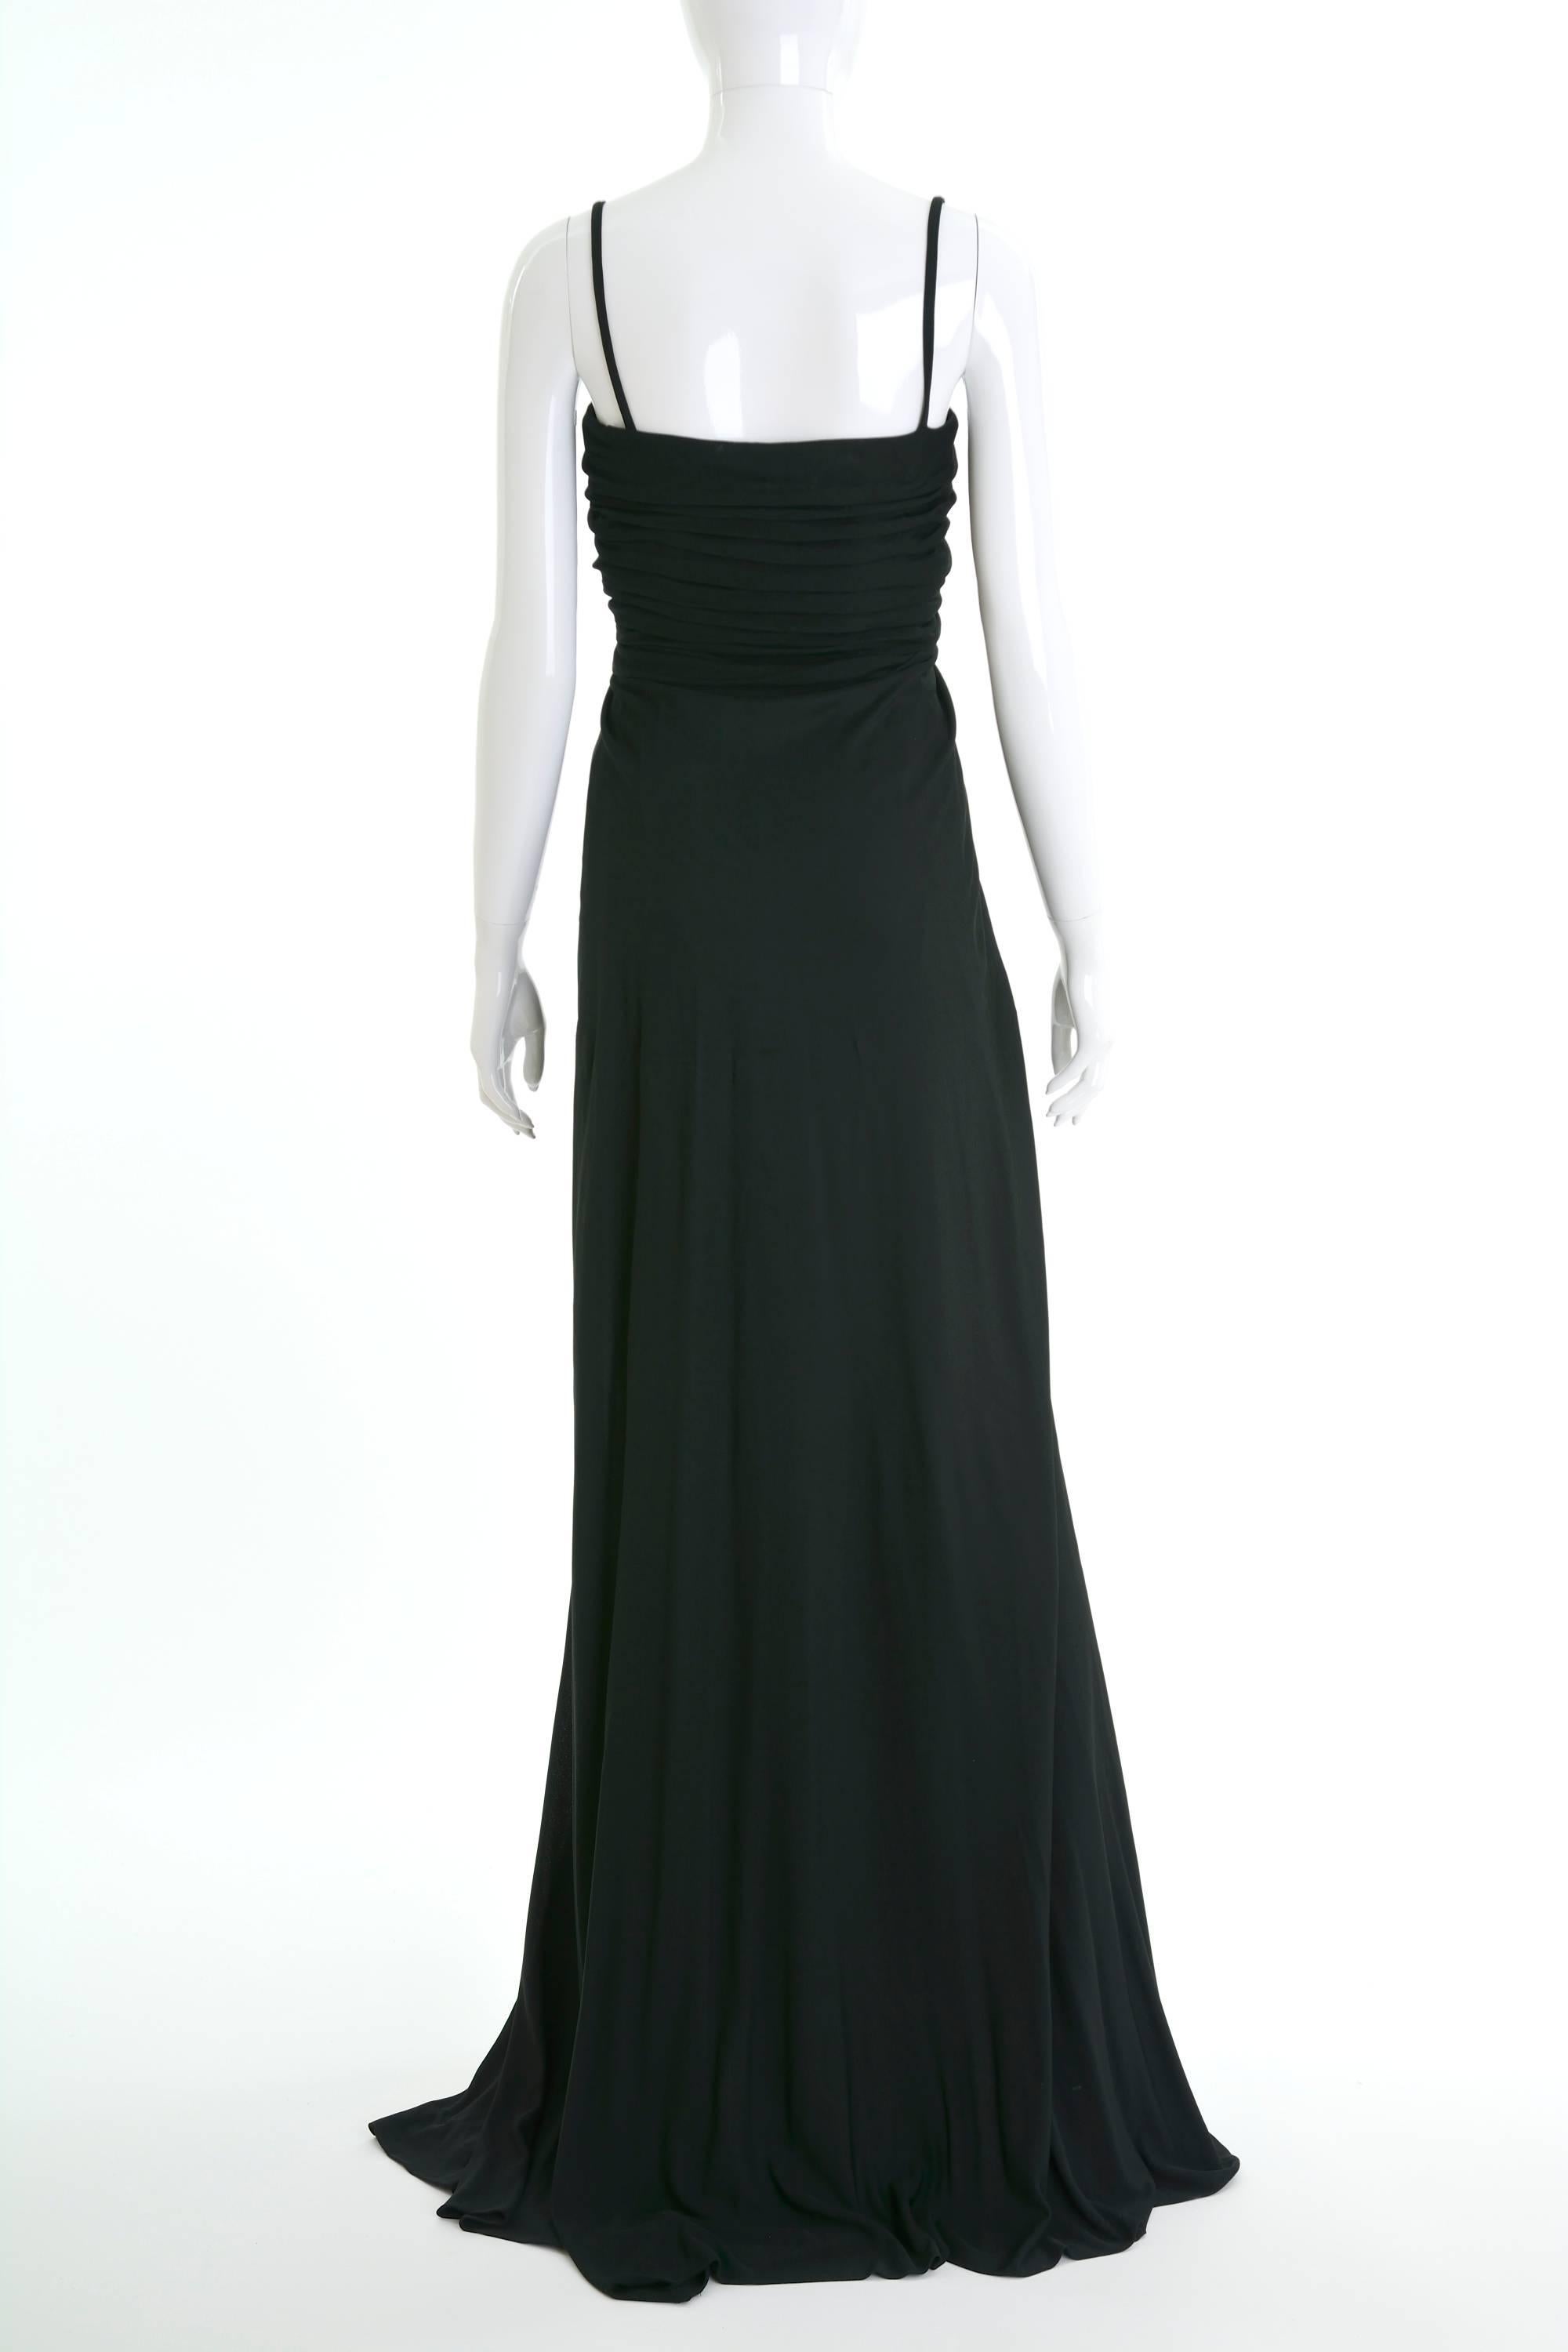 This lovely 1970s Italian Couture long dress is in black jersey fabric with draped details. It has spaghetti straps, boning bodice and back zip closure. 

Good vintage condition

Label: SORELLE CHIOSTRI Firenze
Fabric: jersey silk
Color :